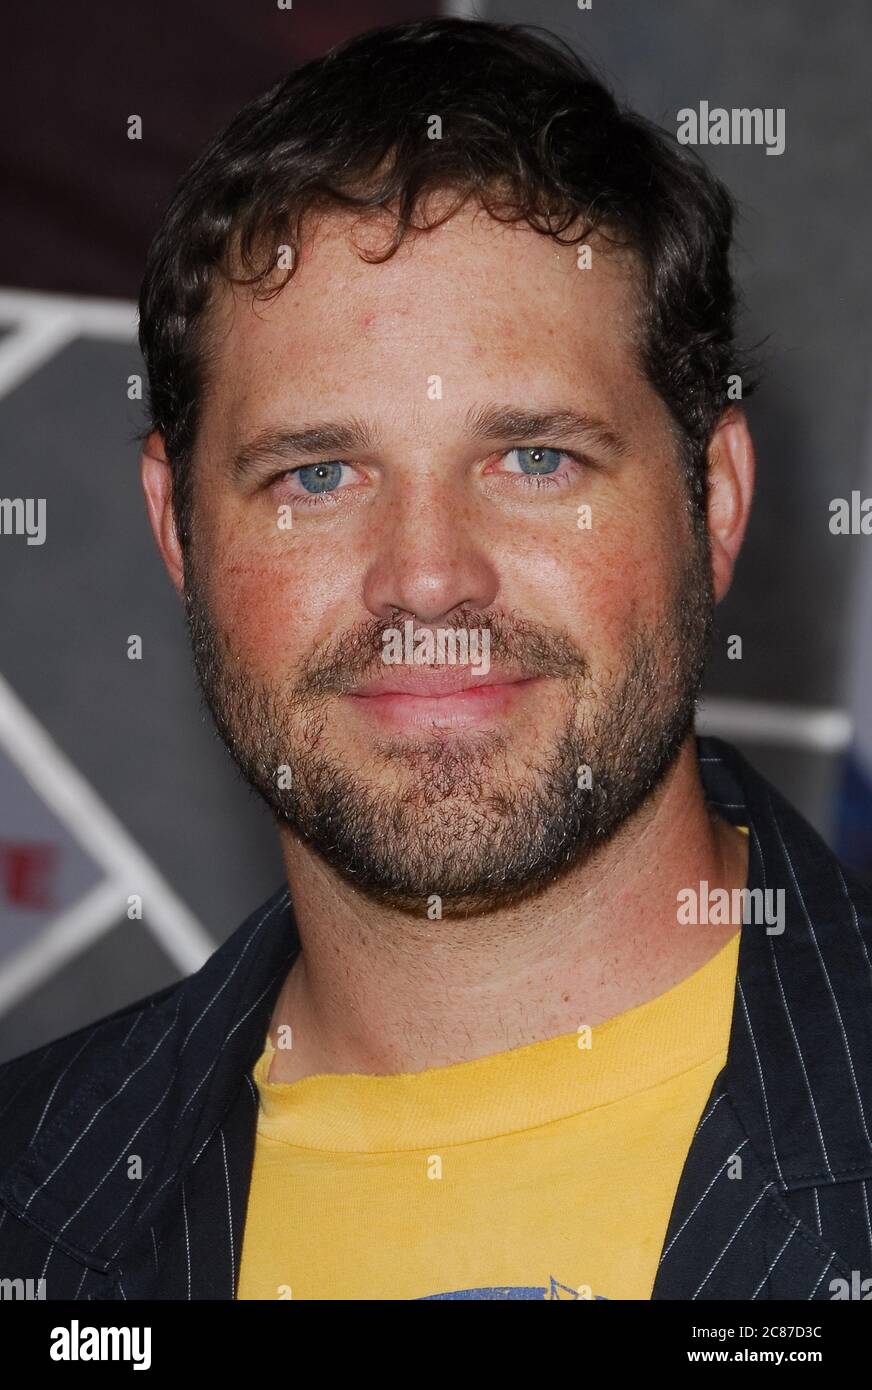 David Denman at the World Premiere of 'Dan In Real Life' held at the El Capitan Theatre in Hollywood, CA. The event took place on Wednesday, October 24, 2007. Photo by: SBM / PictureLux- File Reference # 34006-9031SBMPLX Stock Photo